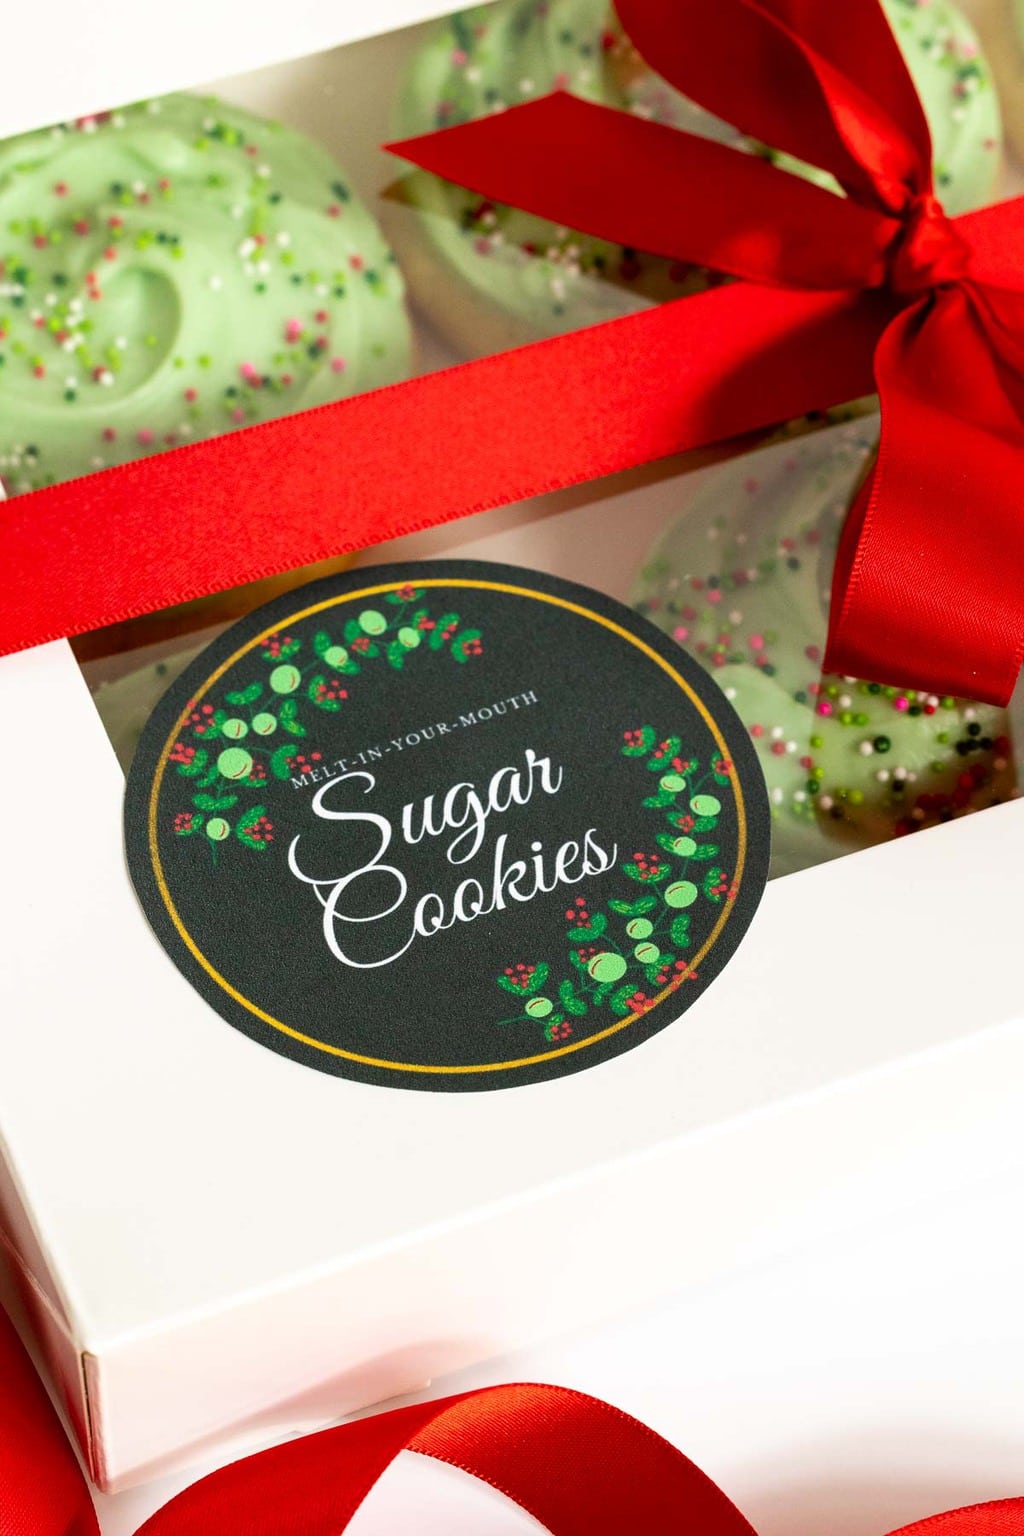 Extreme vertical closeup photo of a box of Copycat Crumbl Christmas Sugar Cookies ready for gift-giving with a custom label.